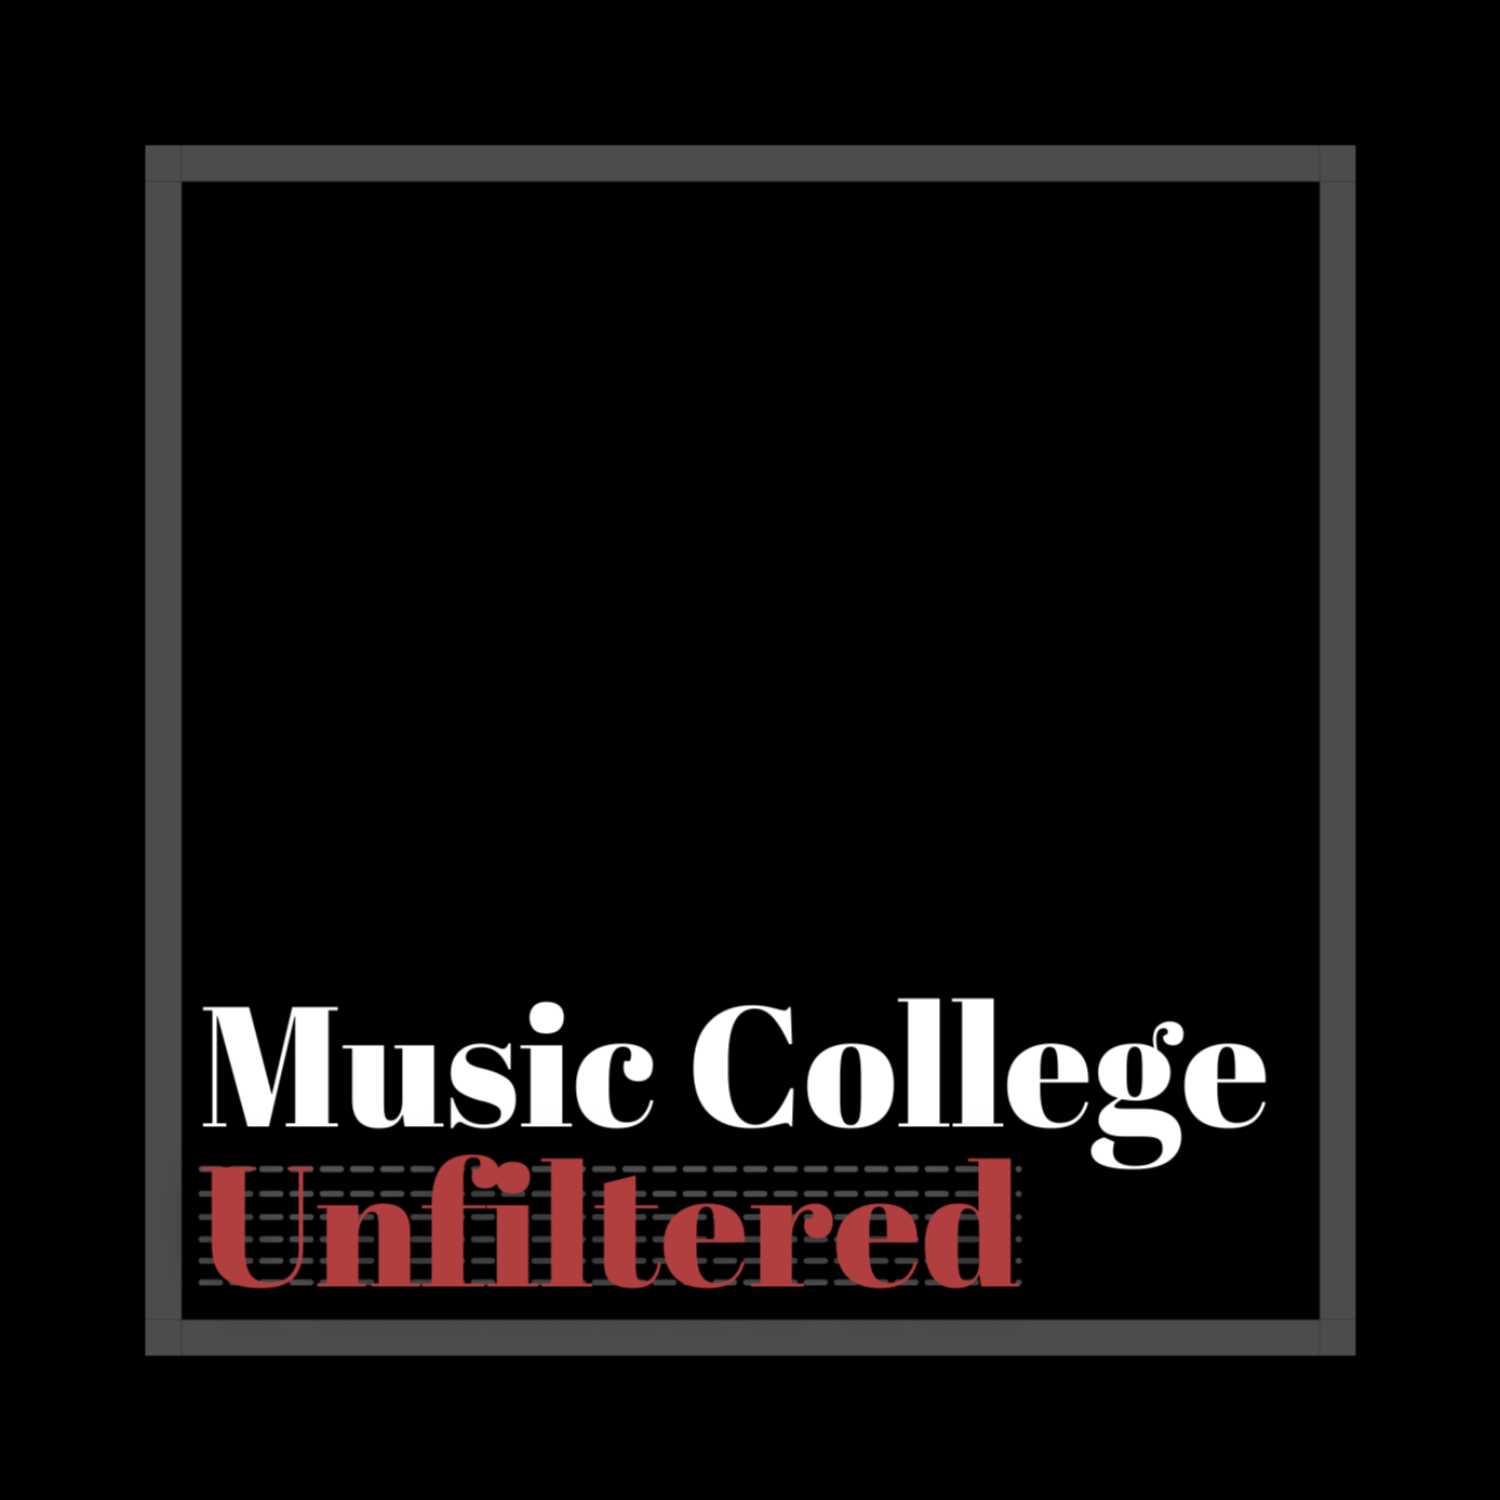 Welcome to Music College Unfiltered!